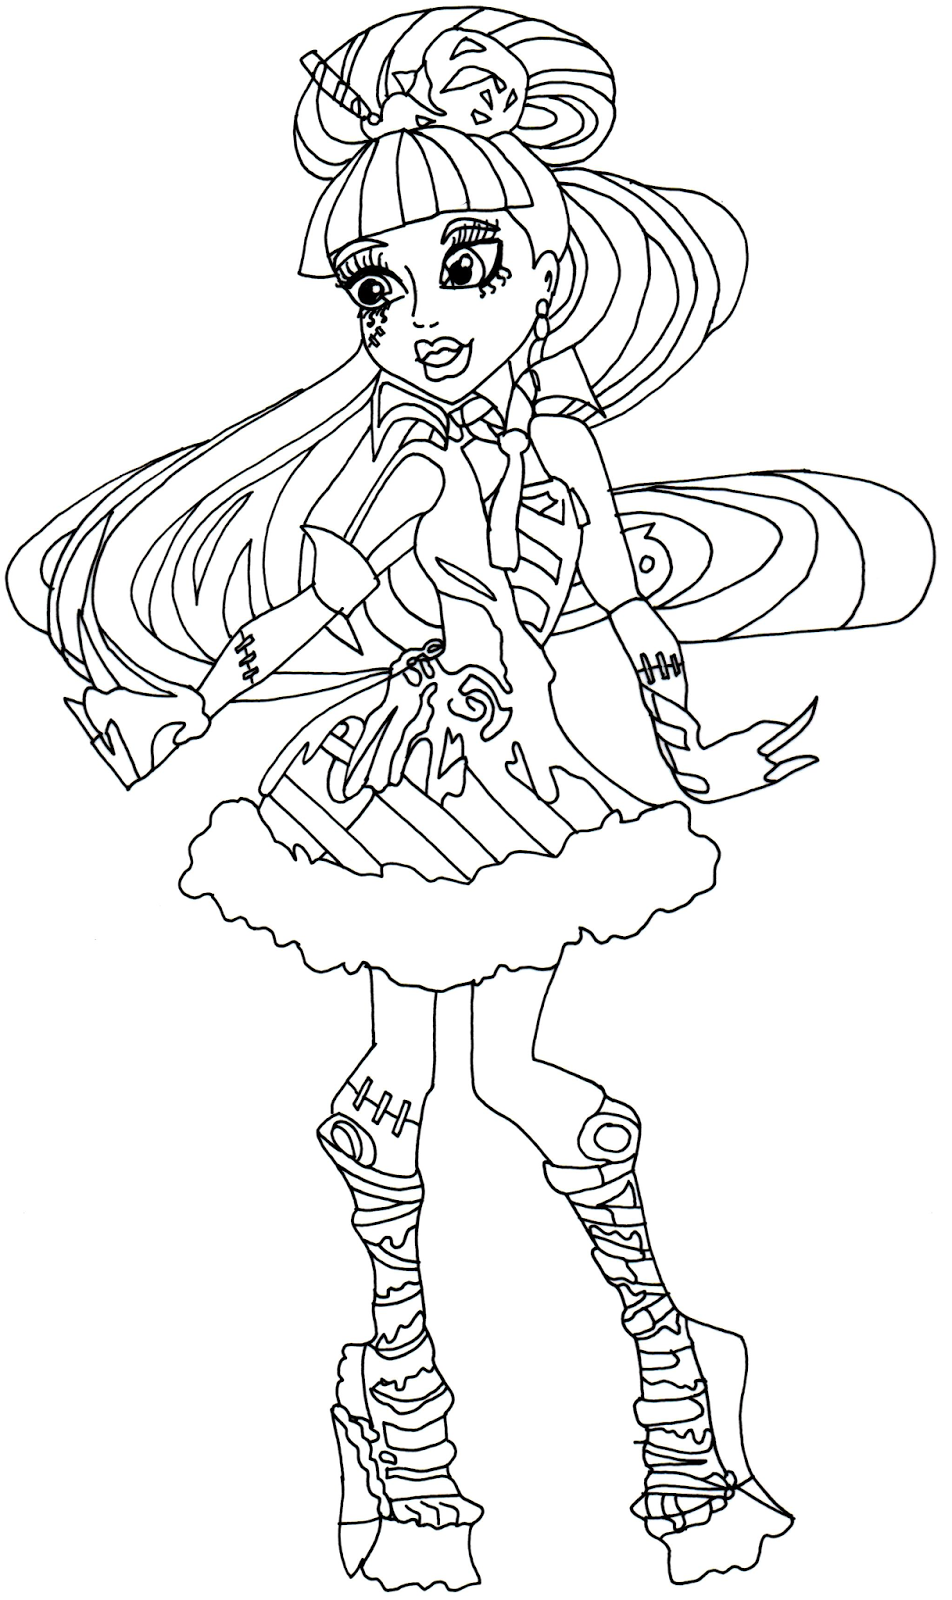  Monster High Coloring Pages | Coloring pages for Girls | Cool coloring page | #19